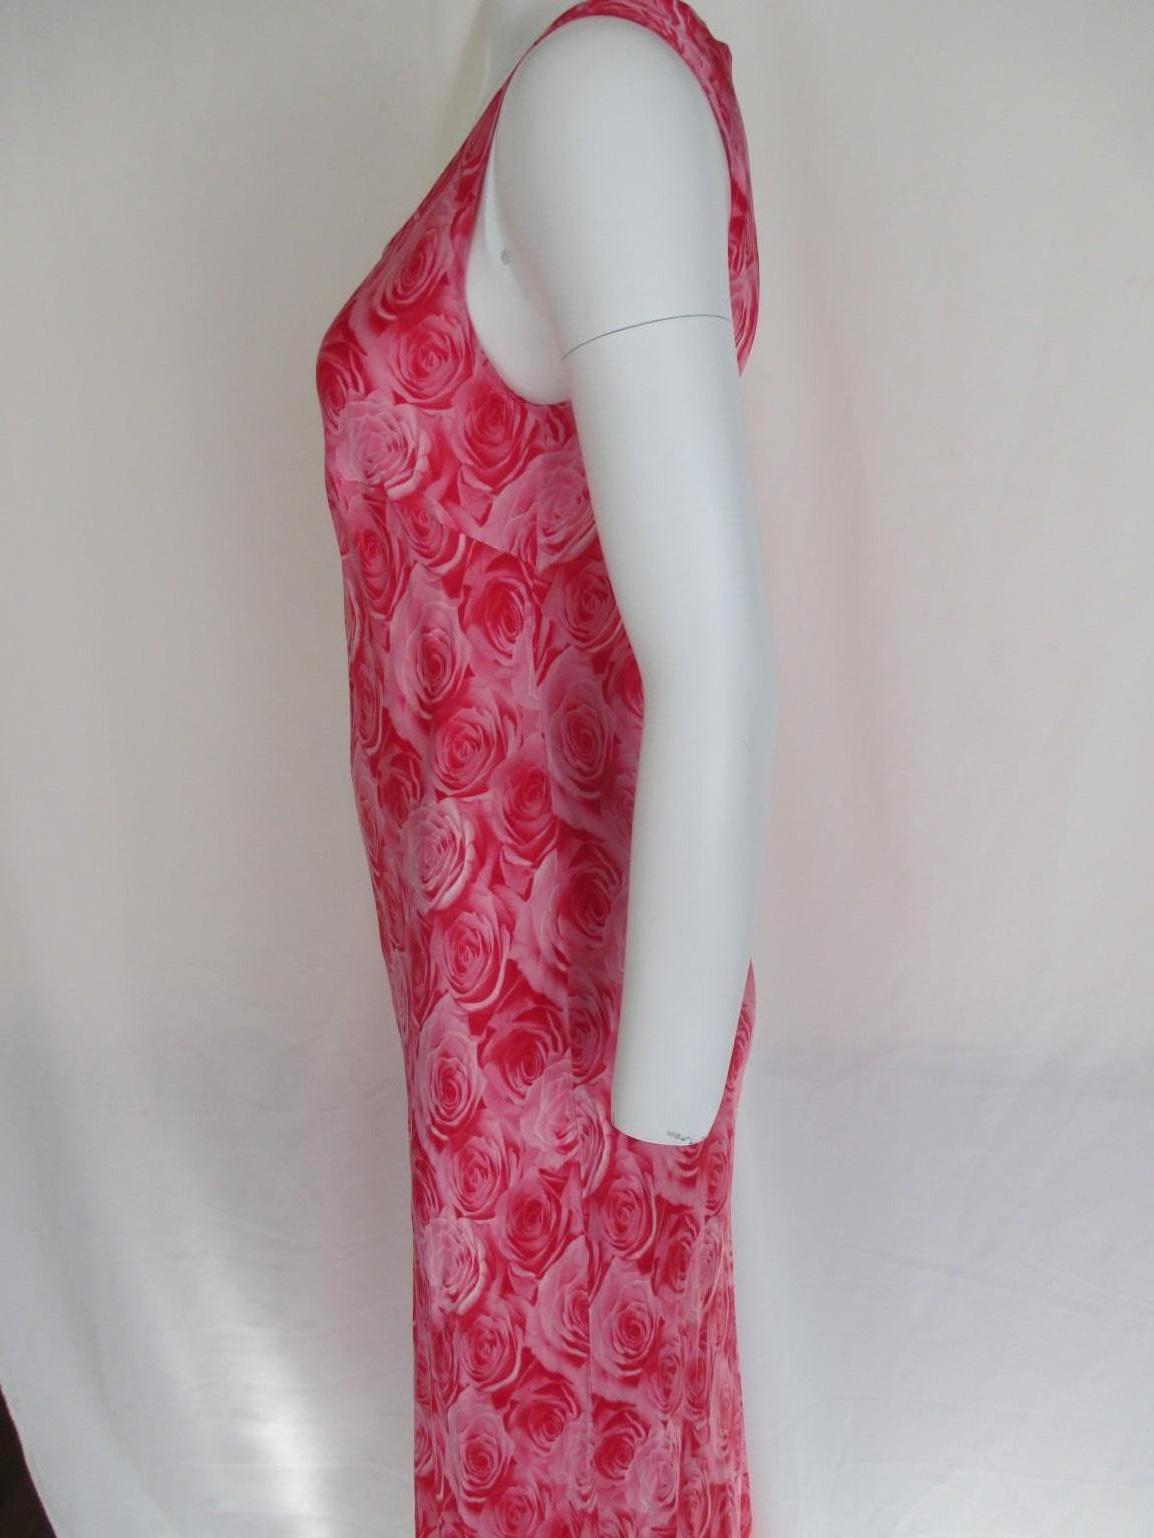 Beautiful vintage dress made by Escada with roses
Material:  100% silk with a little stretch
Color: pink/red 
no zipper
Size: Appears to be small, please refer to the measurements in the description.

Please note that vintage items are not new and